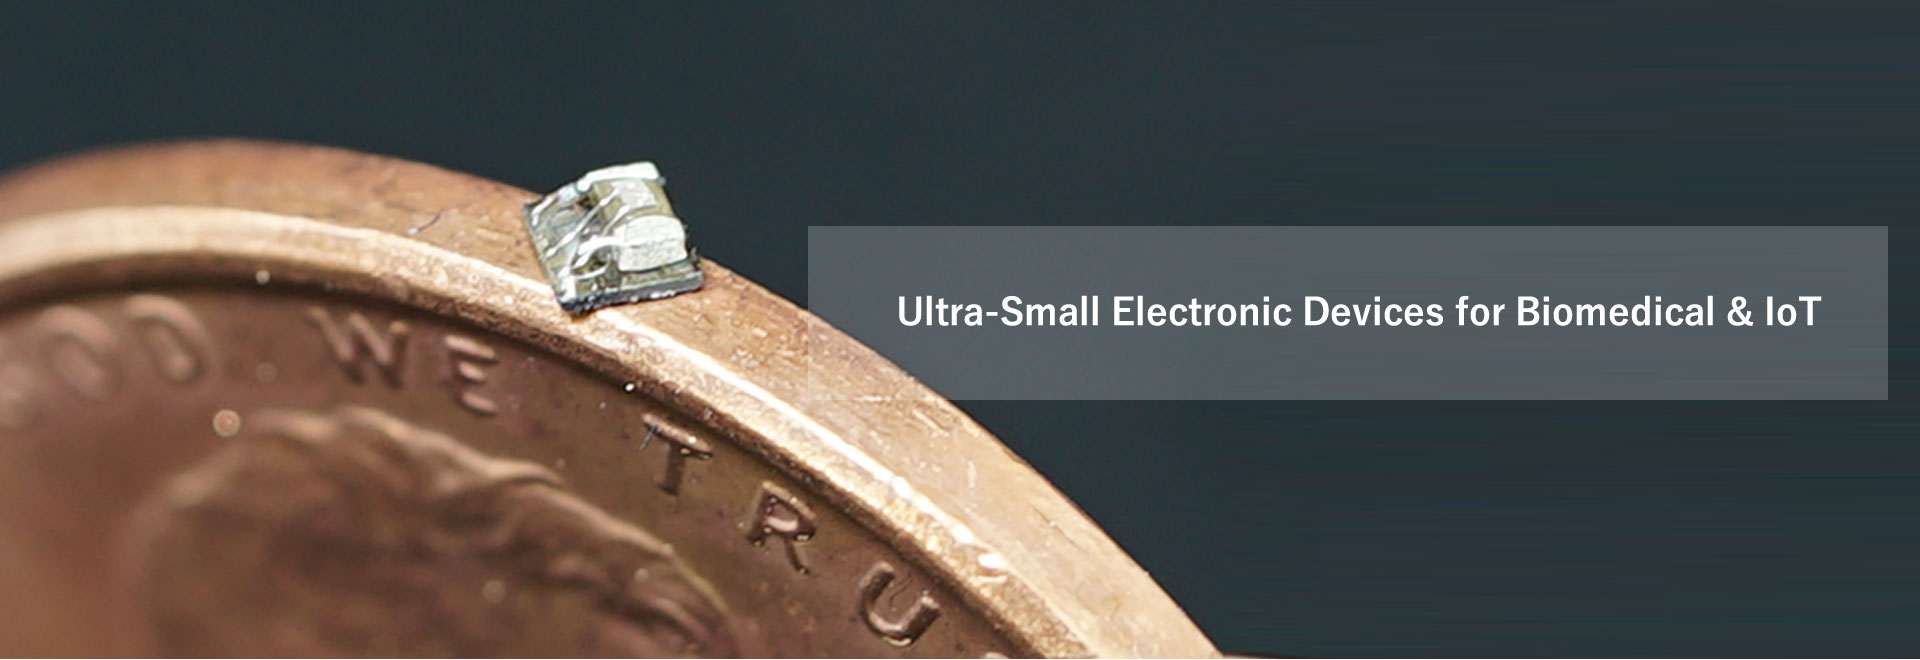 Ultra-Small Electronic Devices for Biomedical & IoT